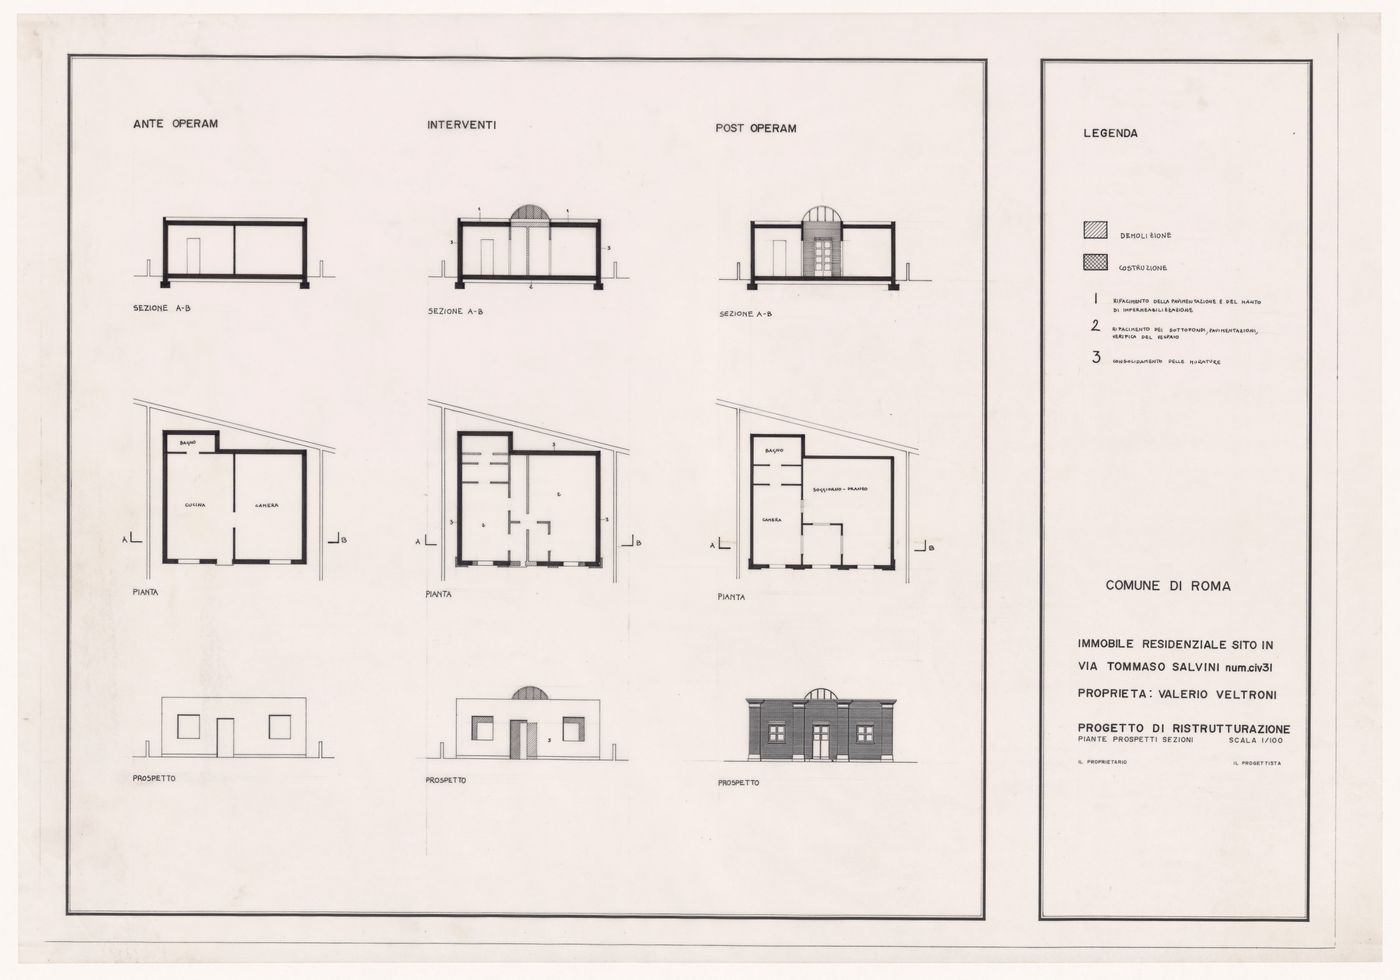 Sections, plans, and elevations for Casa Veltroni, Rome, Italy